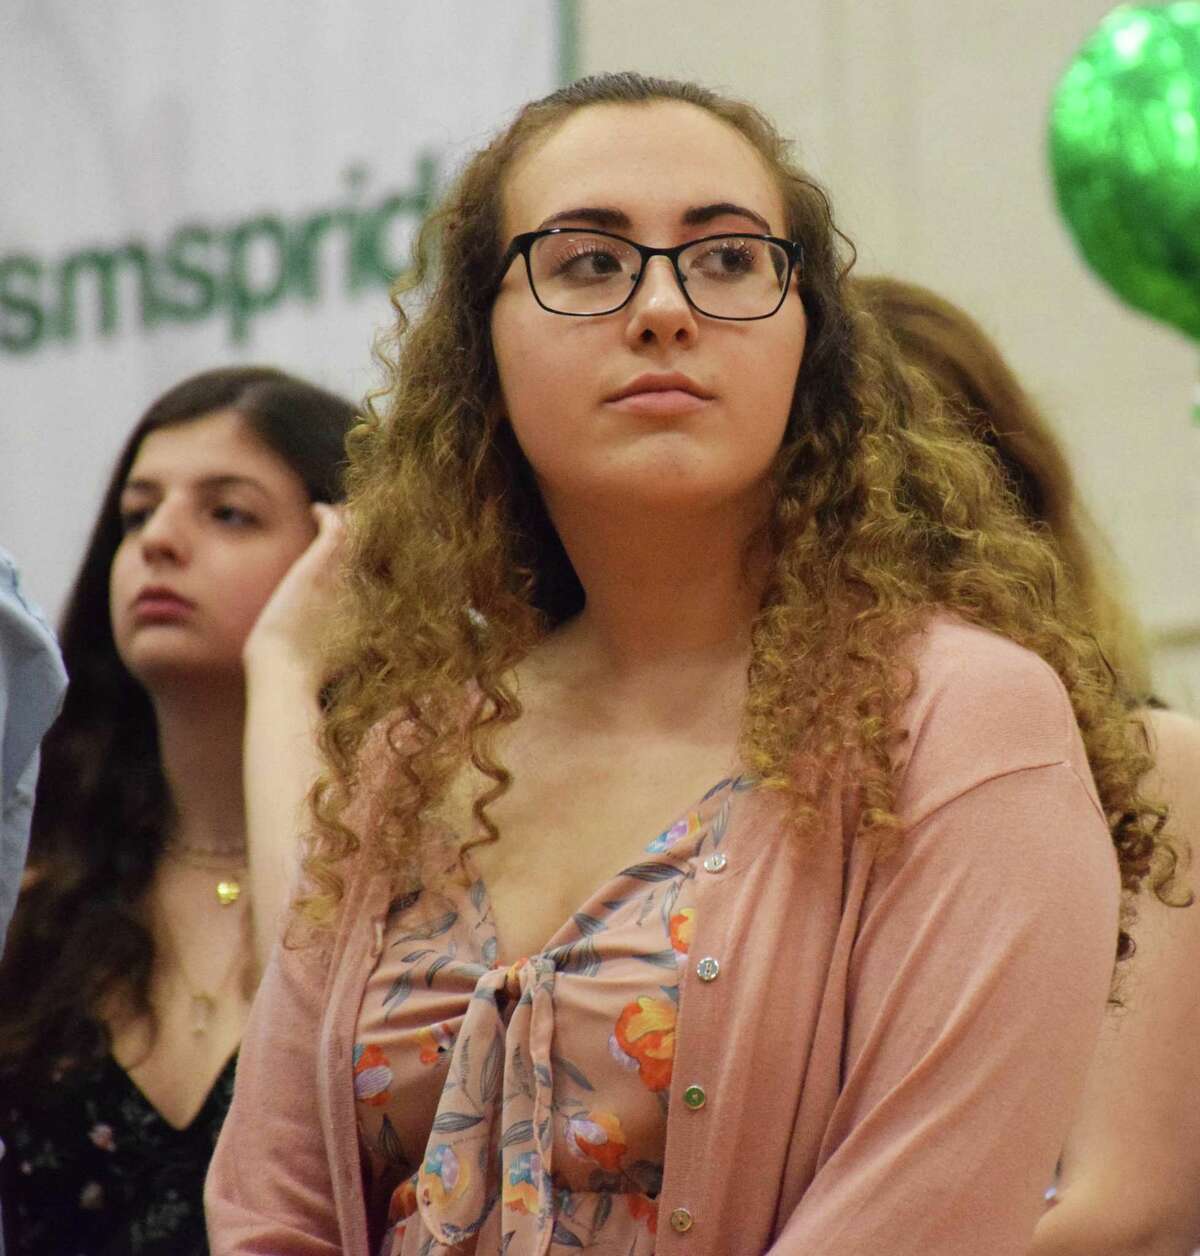 Spectrum/Schaghticoke Middle School in New Milford held promotion ceremonies for its graduating eighth graders June 19 and 20, 2019 at the school. Team 8 Blue was promoted June 19 and Teams 8 White and Red were promoted June 20. Above, promotee Jillian Gillotti waits patiently for the processional to conclude.